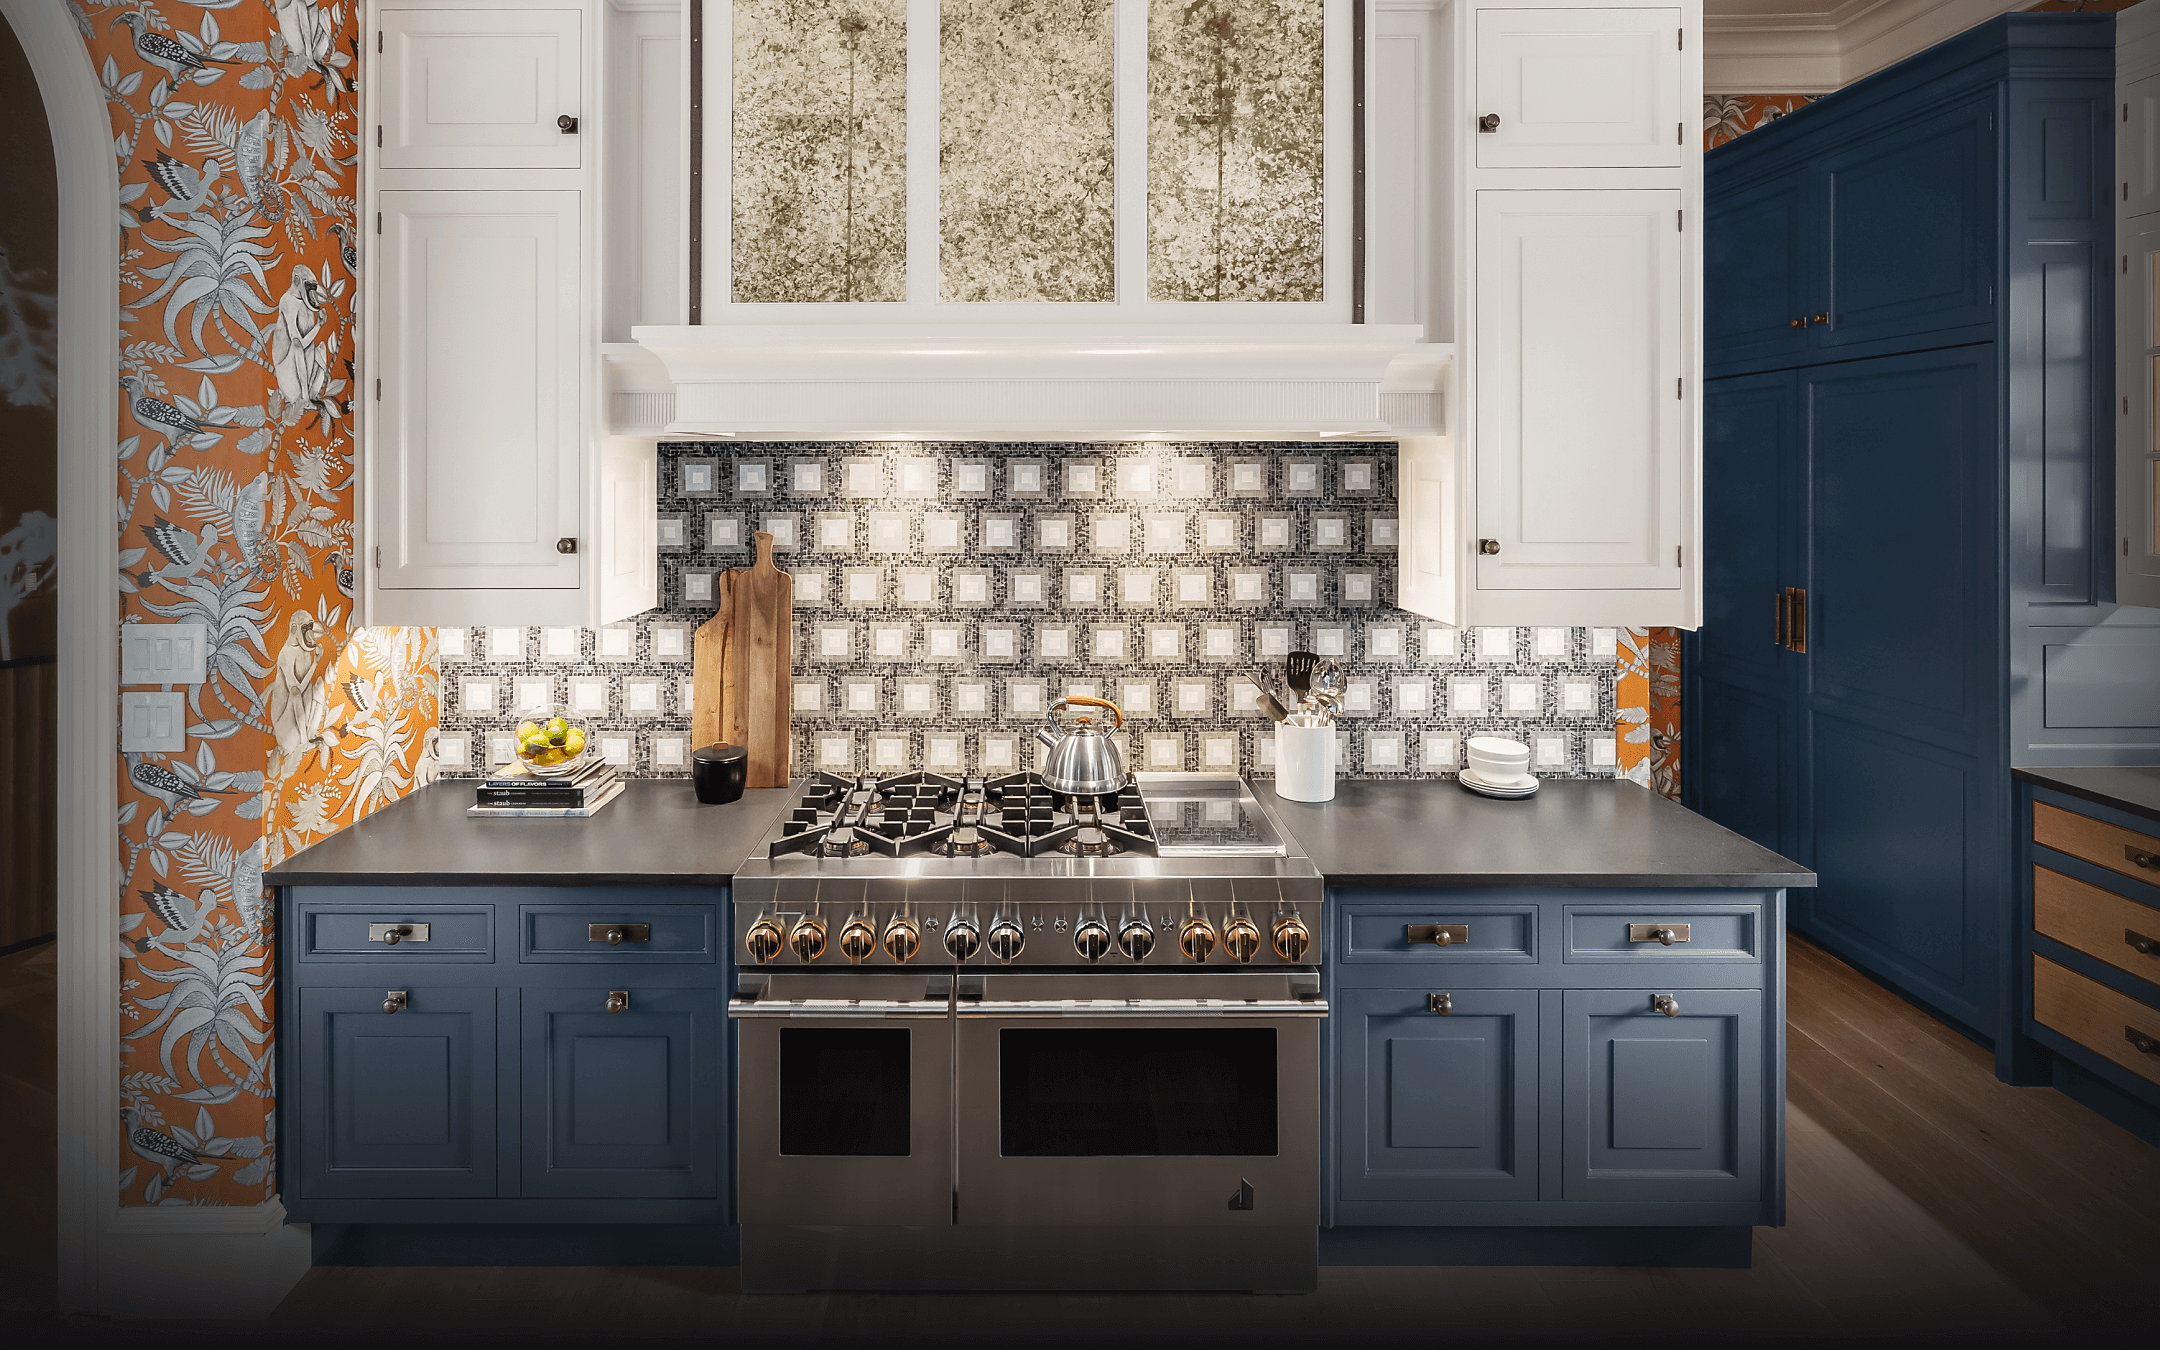  A RISE™ Professional-Style Range in a blue kitchen.